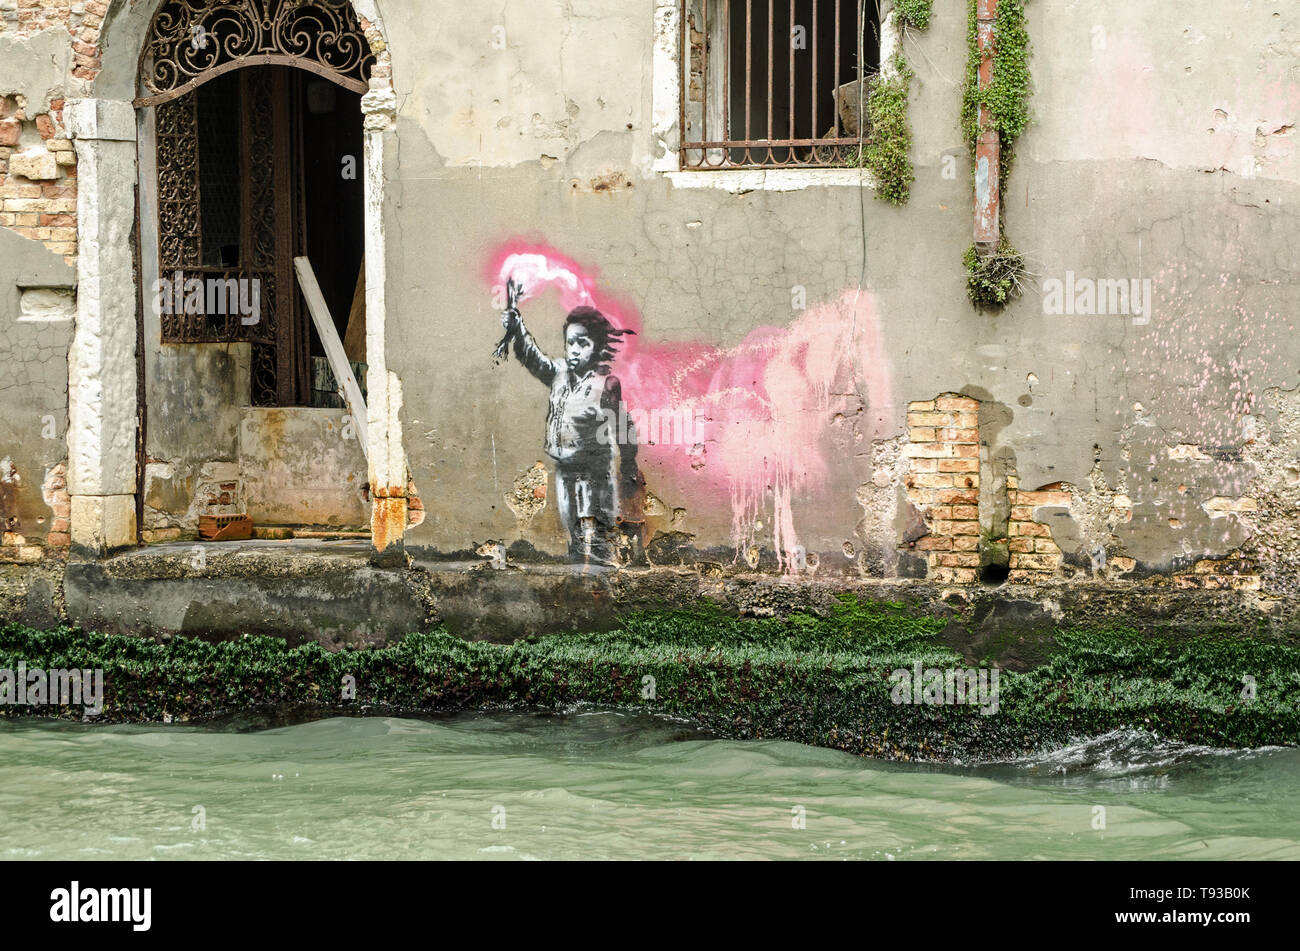 VENICE, ITALY - MAY 15, 2019:  Stencil street art of a child wearing a lifejacket and waving a flare attributed to graffiti artist Banksy.  Viewed fro Stock Photo